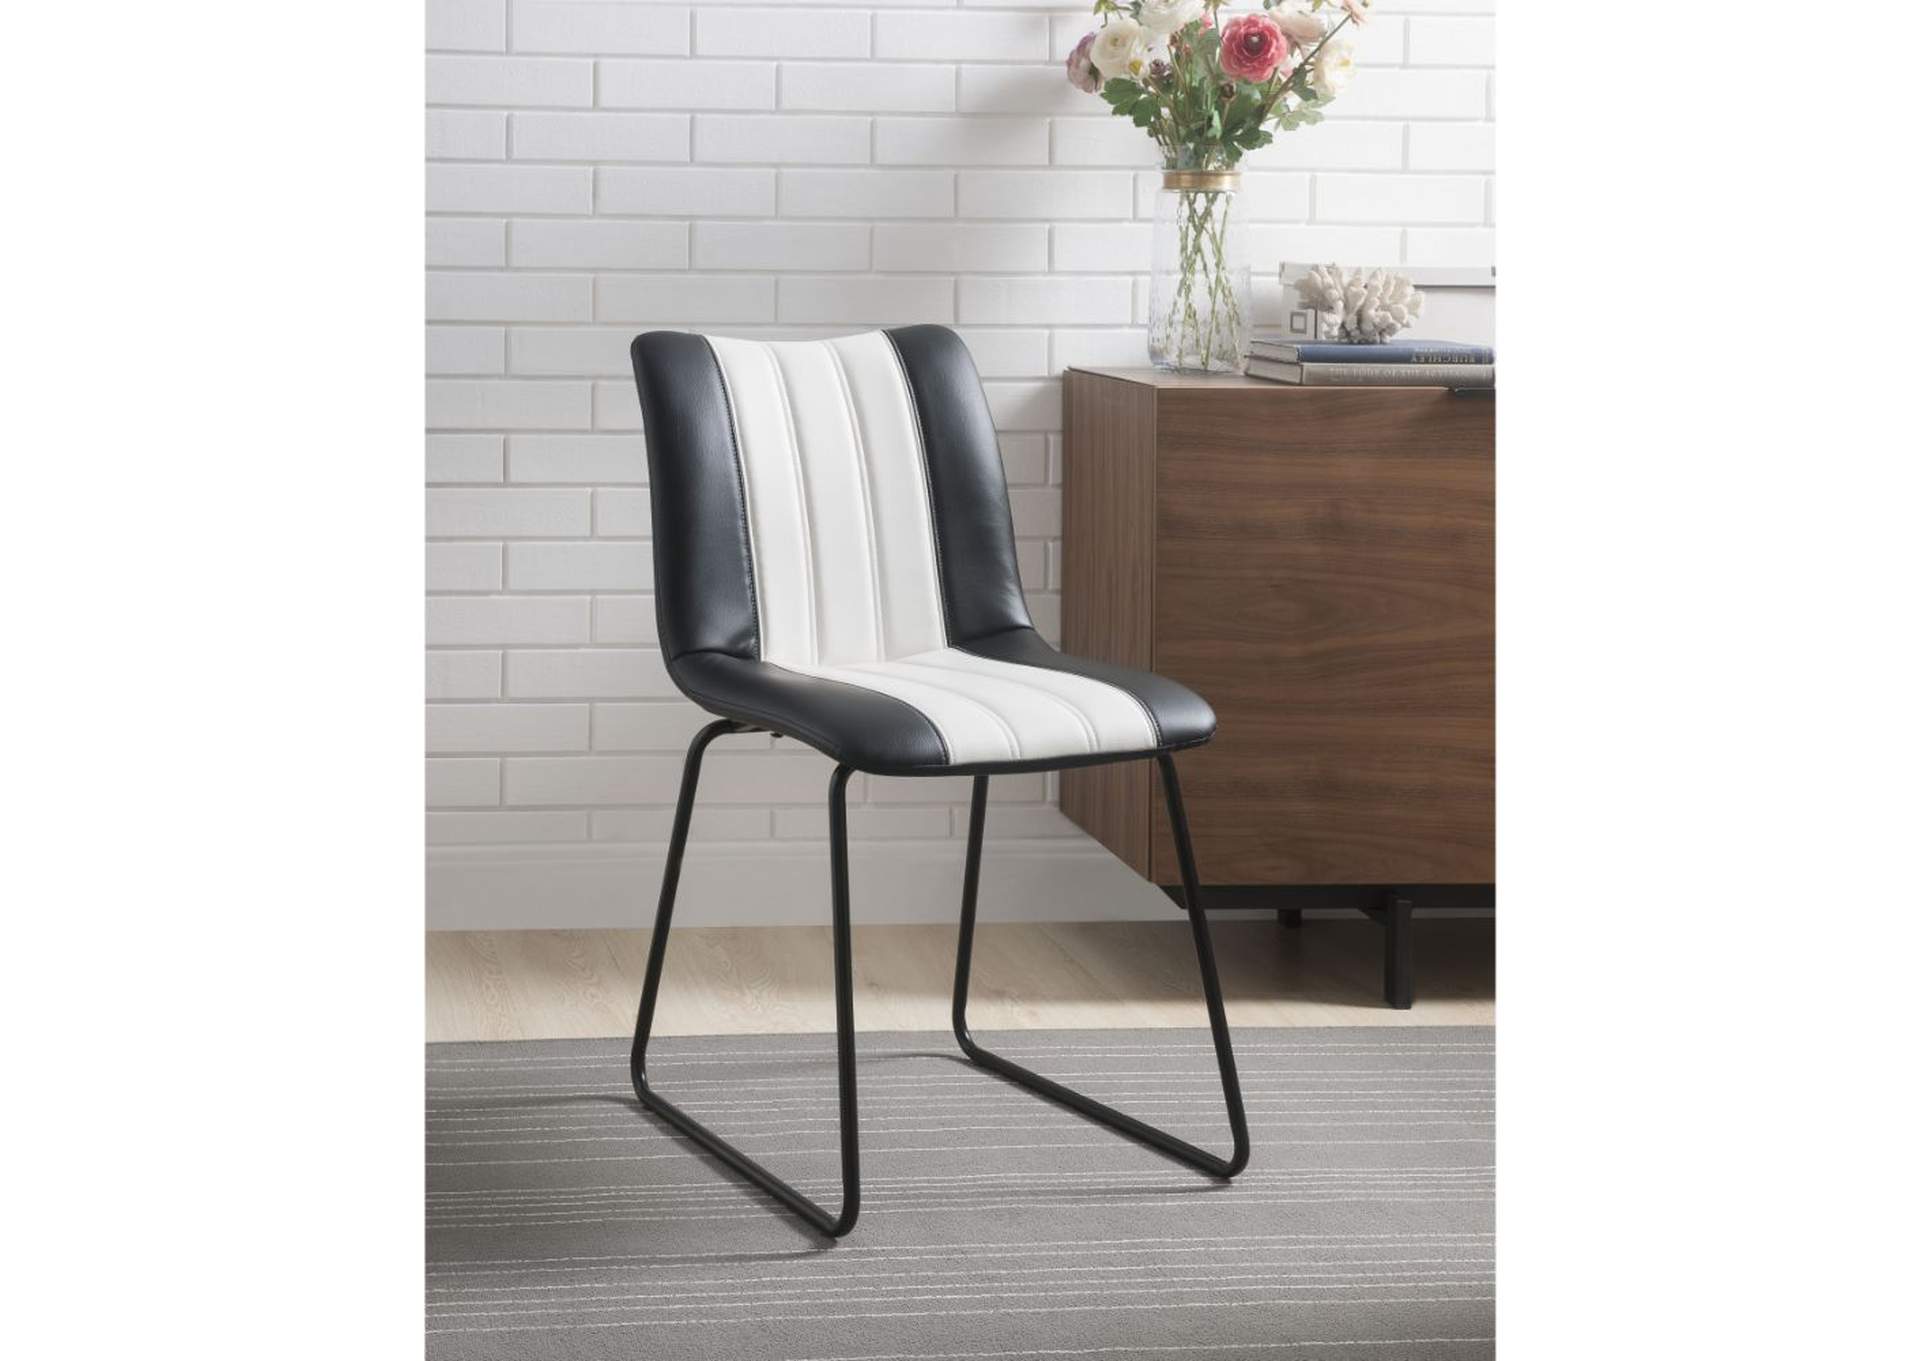 Muscari Accent Chair,Acme